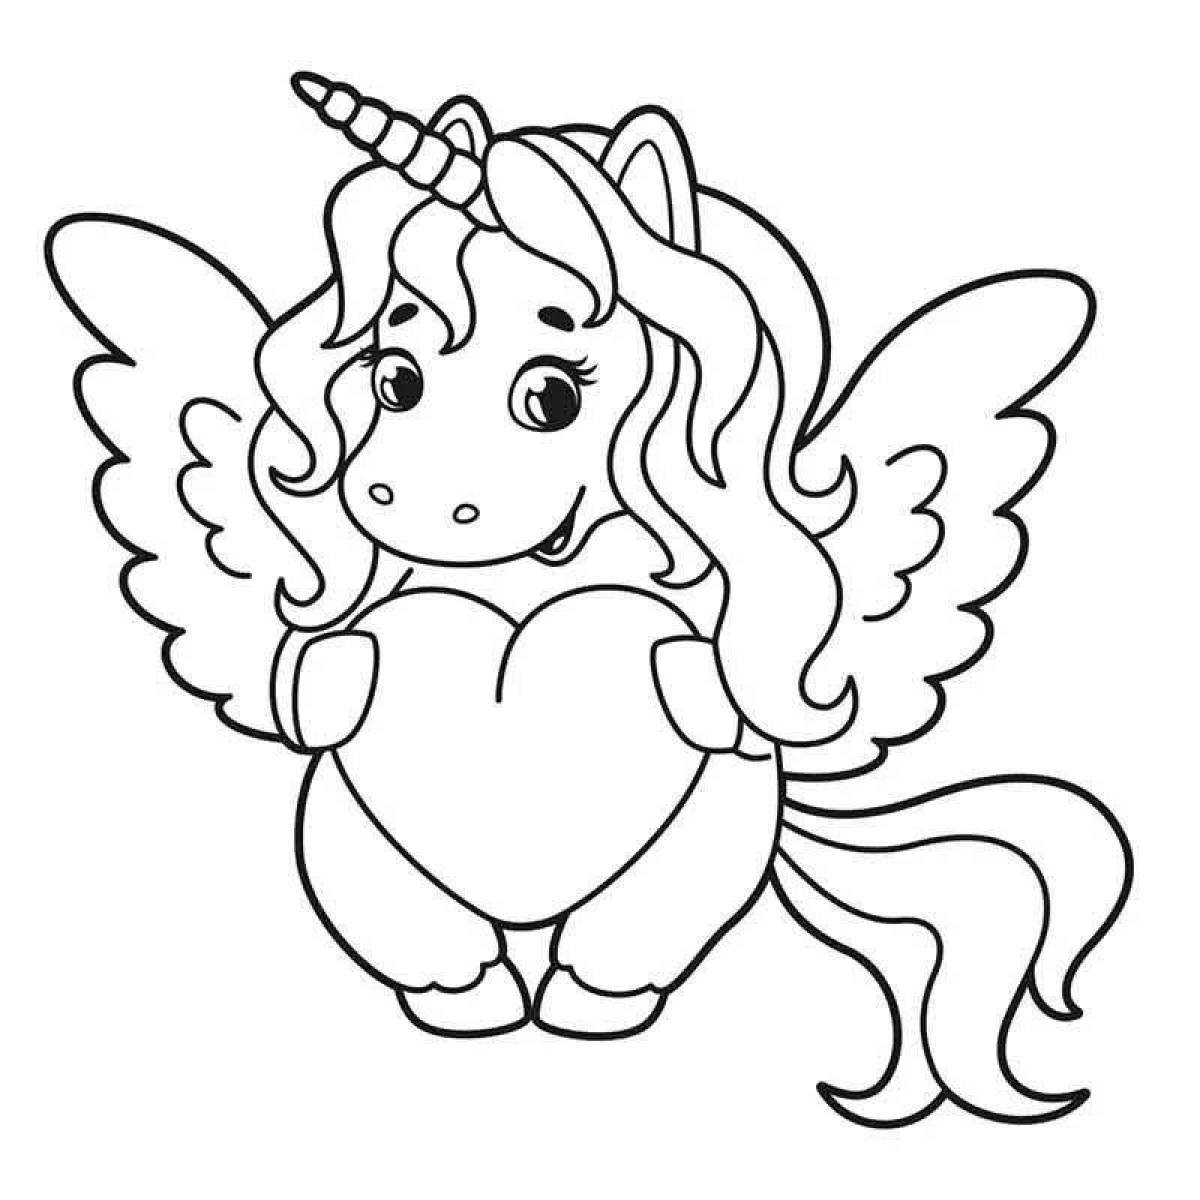 Delightful coloring book for girls 6 years old unicorn